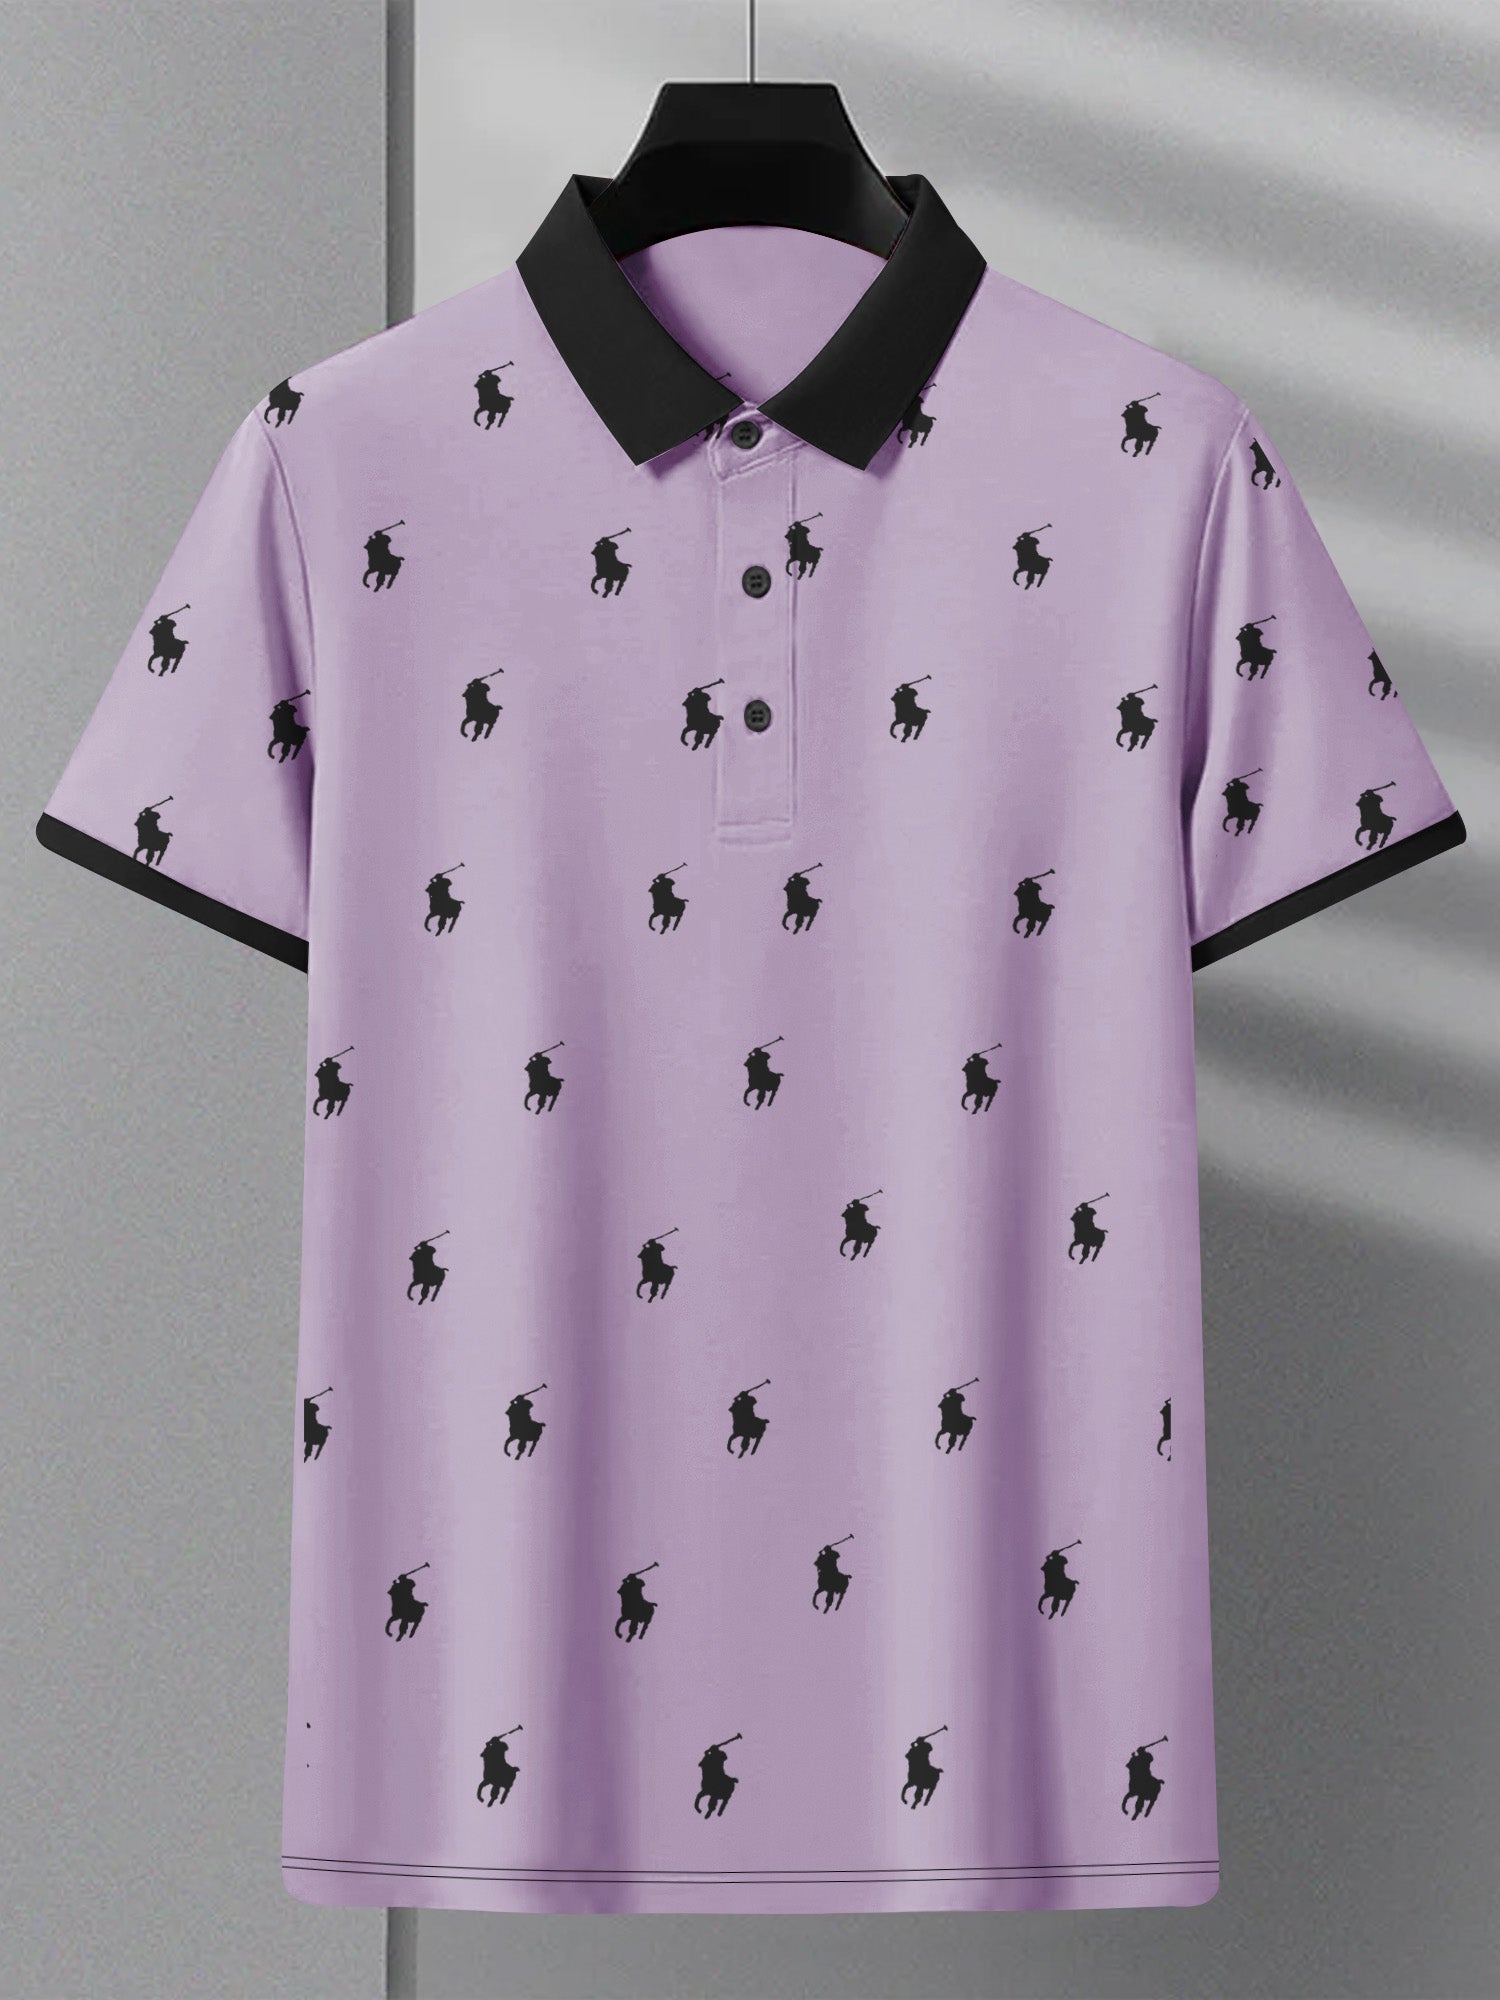 PRL Summer Polo Shirt For Men-Purple with Allover Print-BE681/BR12934